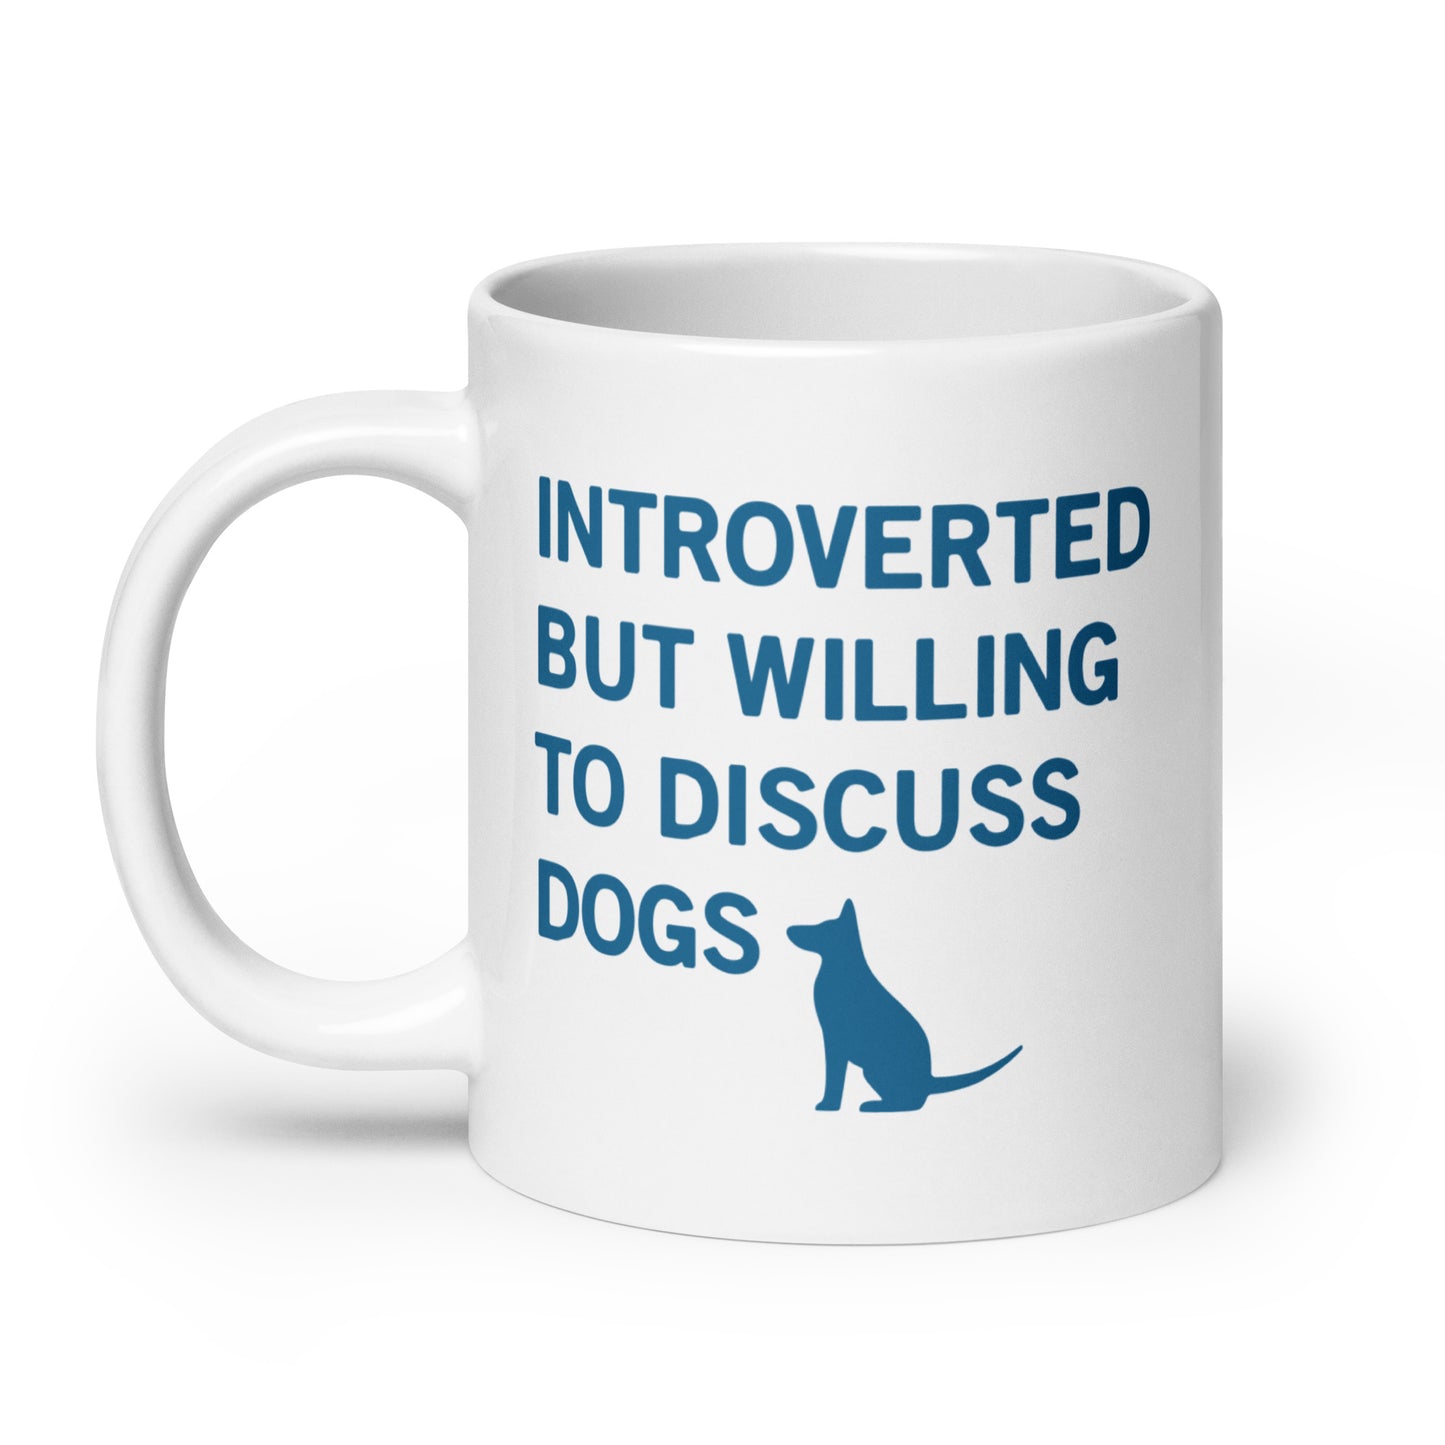 Introverted But Willing To Discuss Dogs Mug